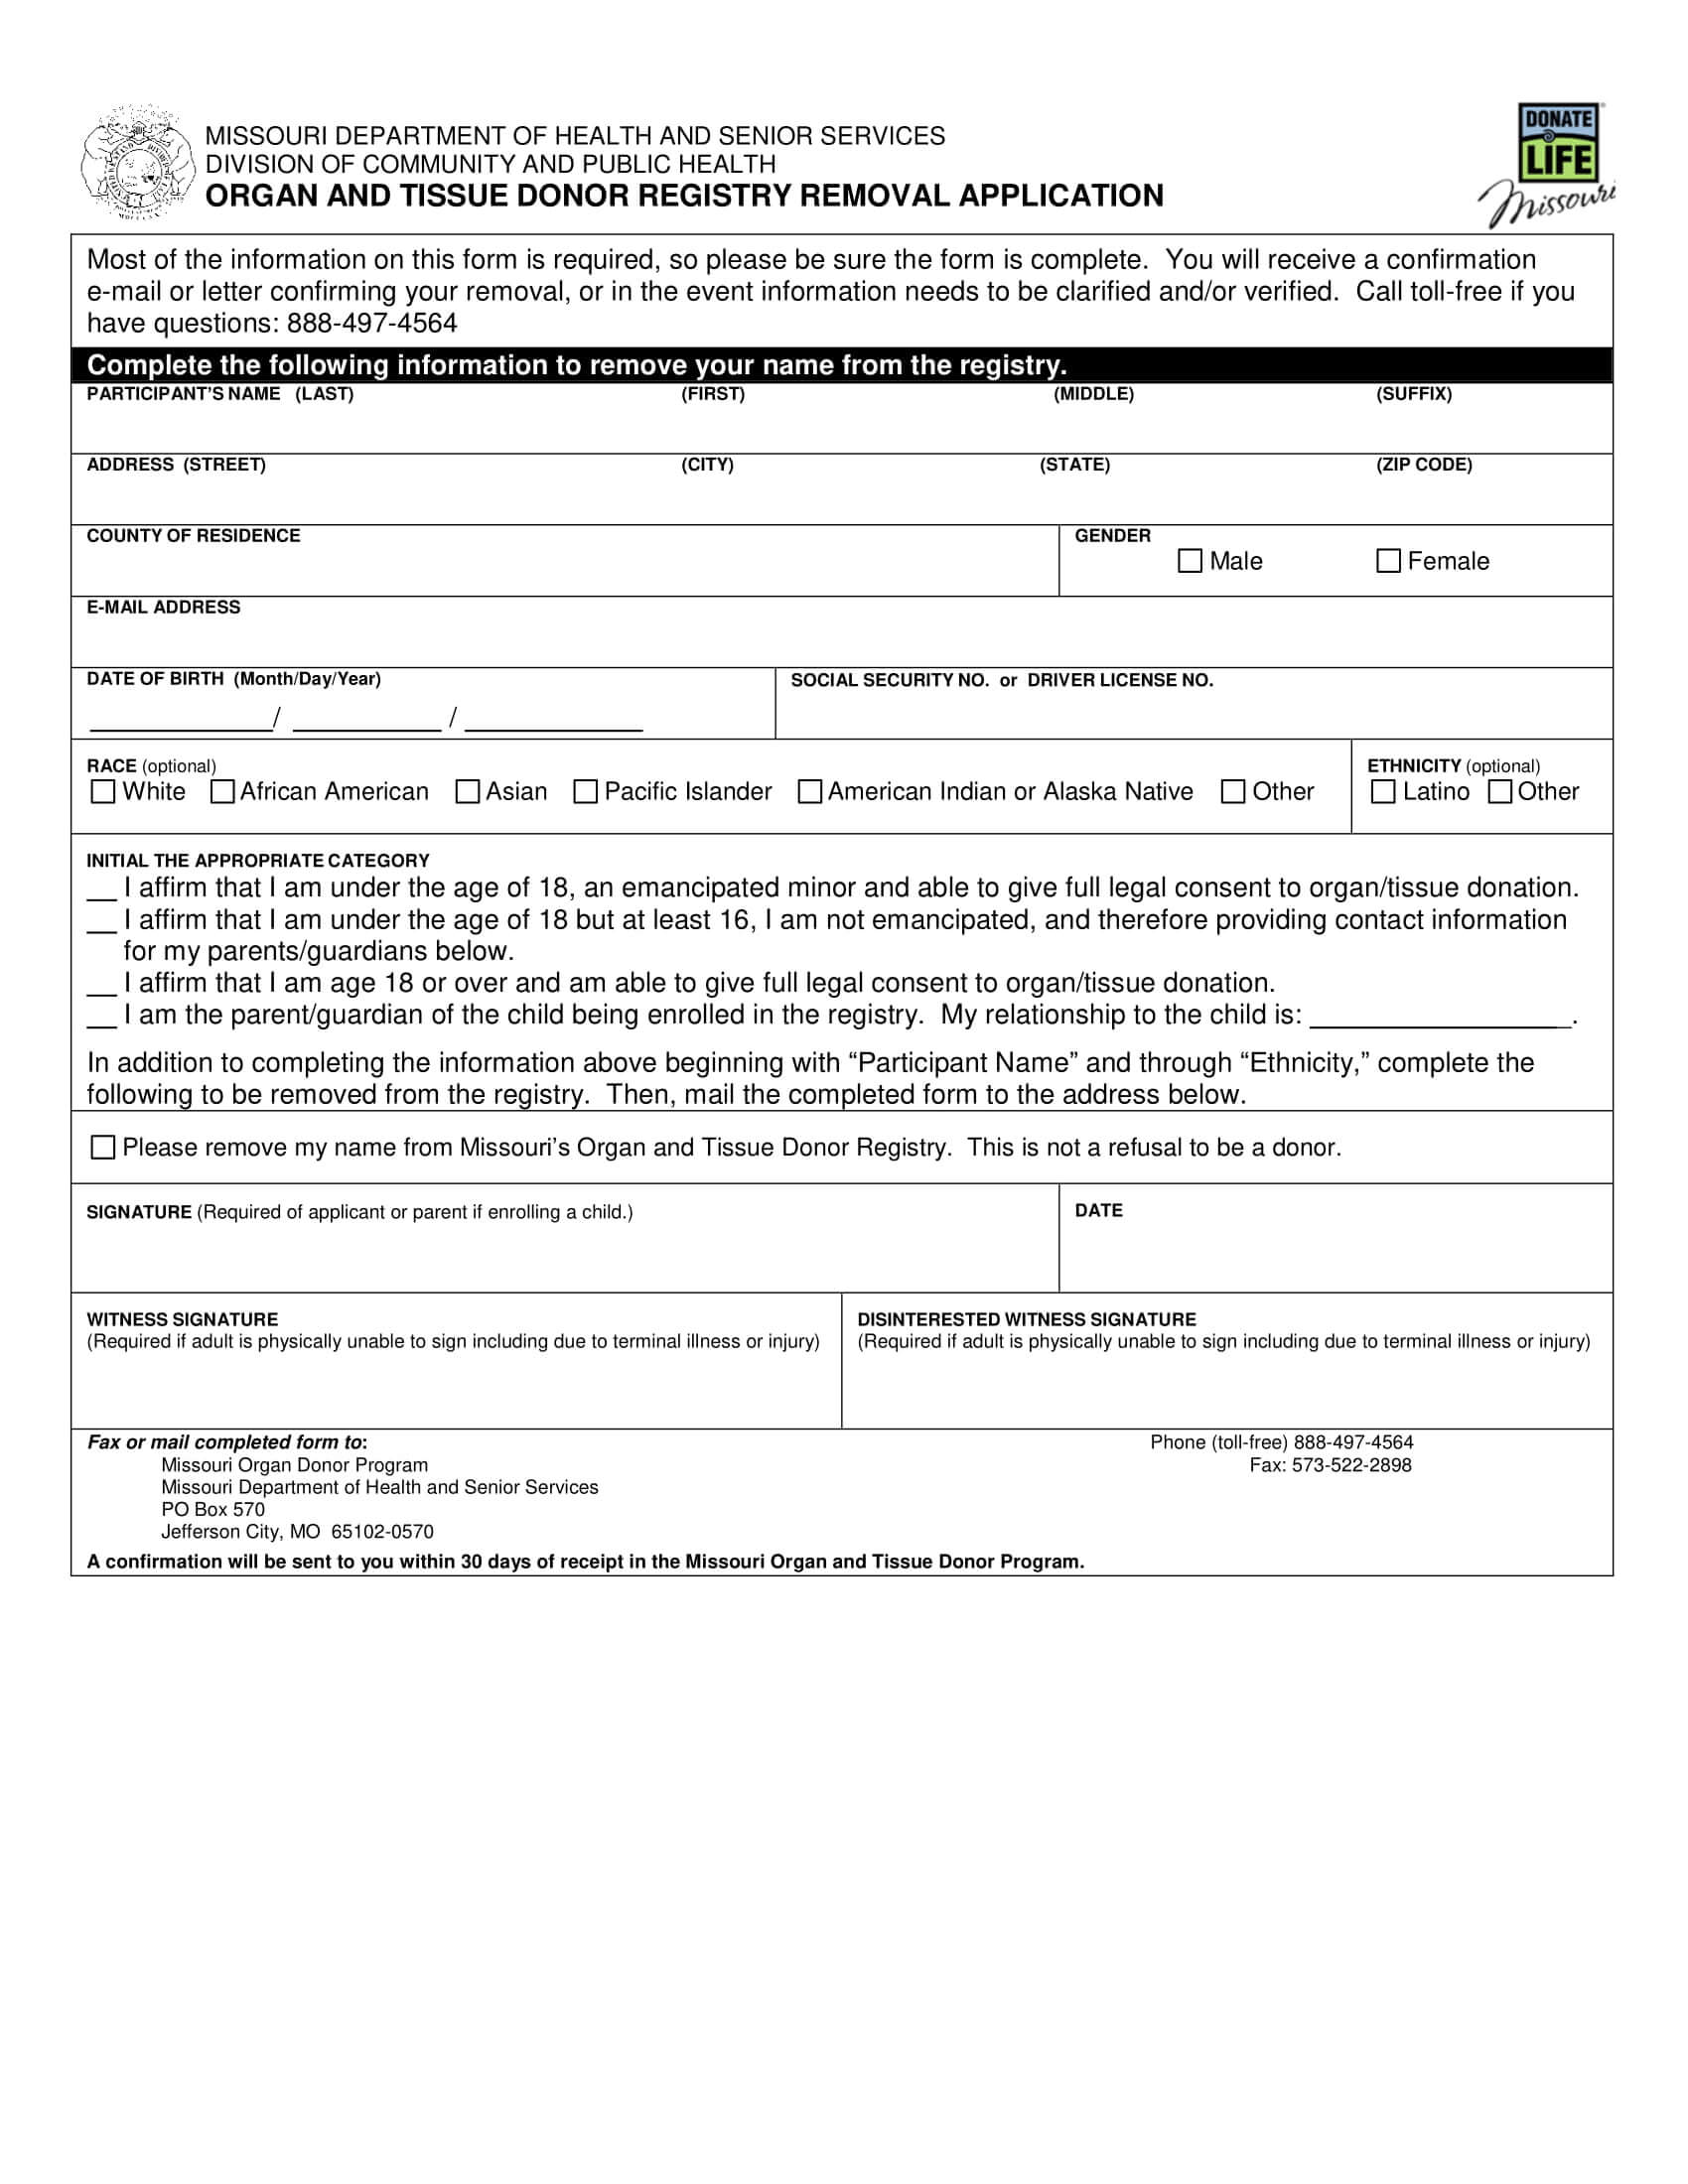 Free Refuse Organ Donation Form | Pdf Intended For Organ Donor Card Template